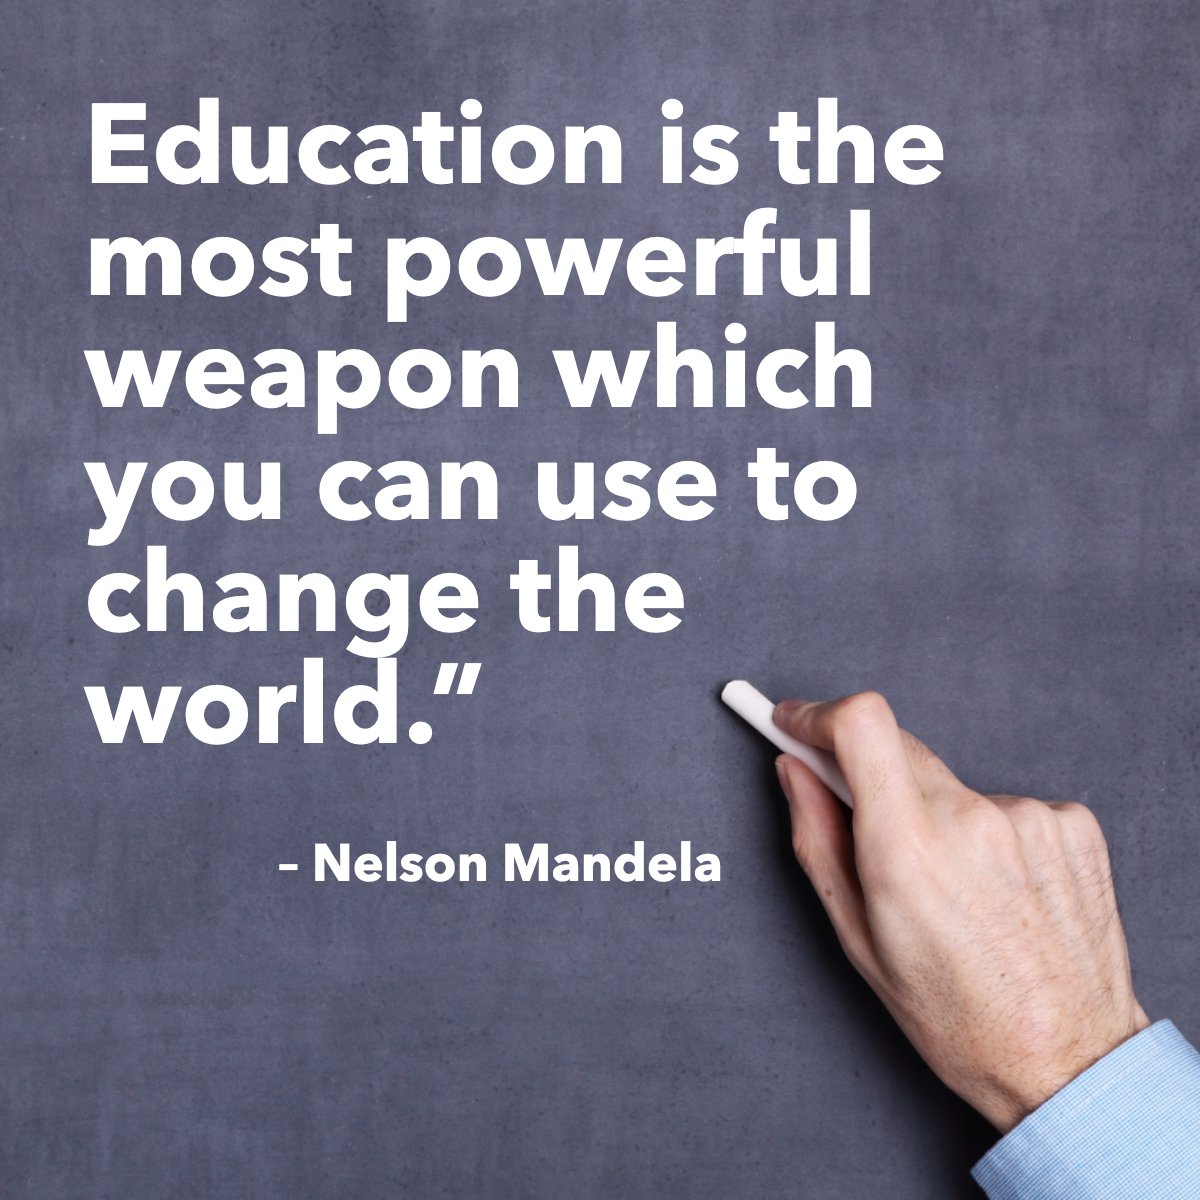 'Education is the most powerful weapon which you can use to change the world' 
— Nelson Mandela  📖

#educationquotes #wisdomquote #wisdomoftheday #quotegram #quoteoftheday #nelsonmandela #educationispower
 #L2LPOSTS